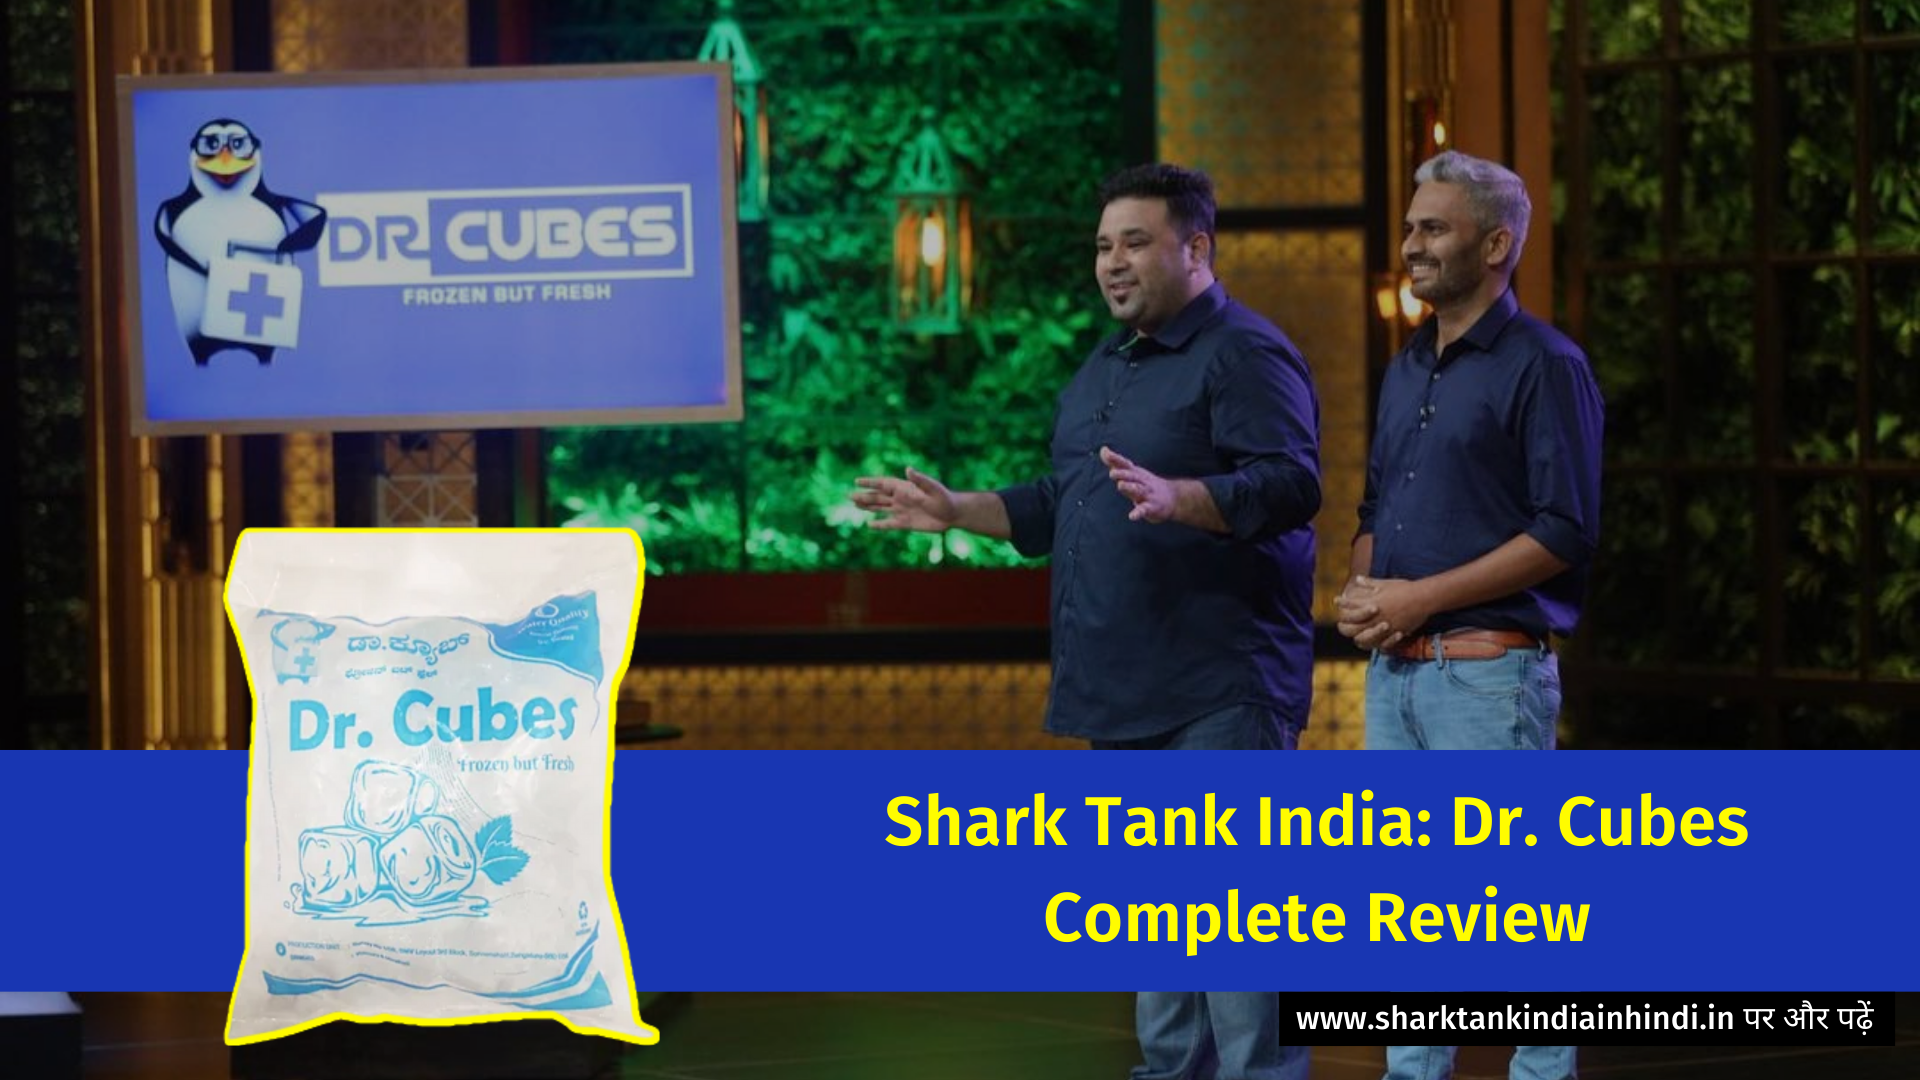 Shark Tank India: Dr. Cubes Complete Review